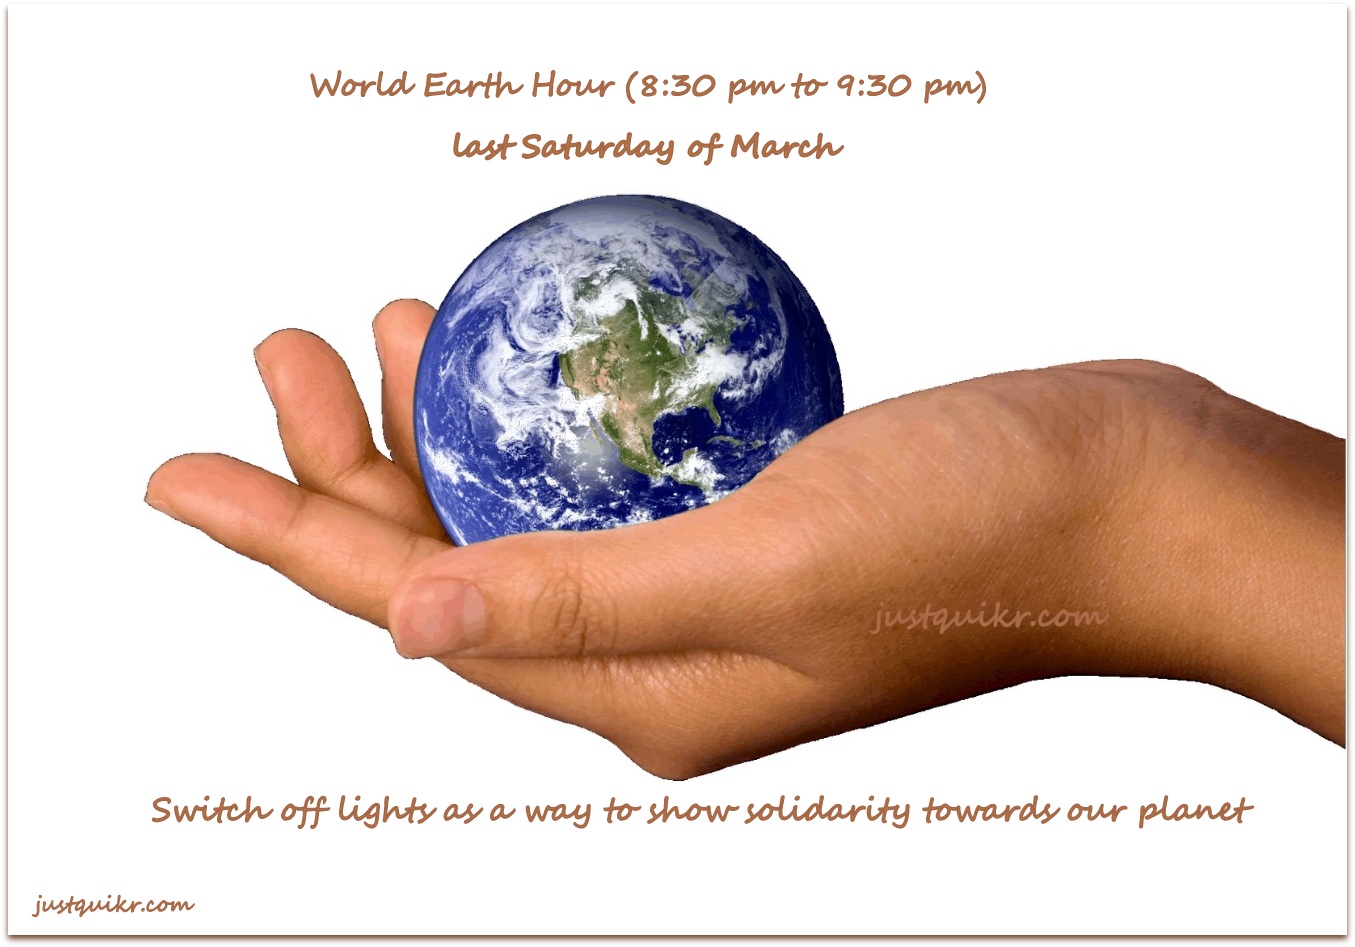 World Earth Hour (8:30 pm to 9:30 pm)